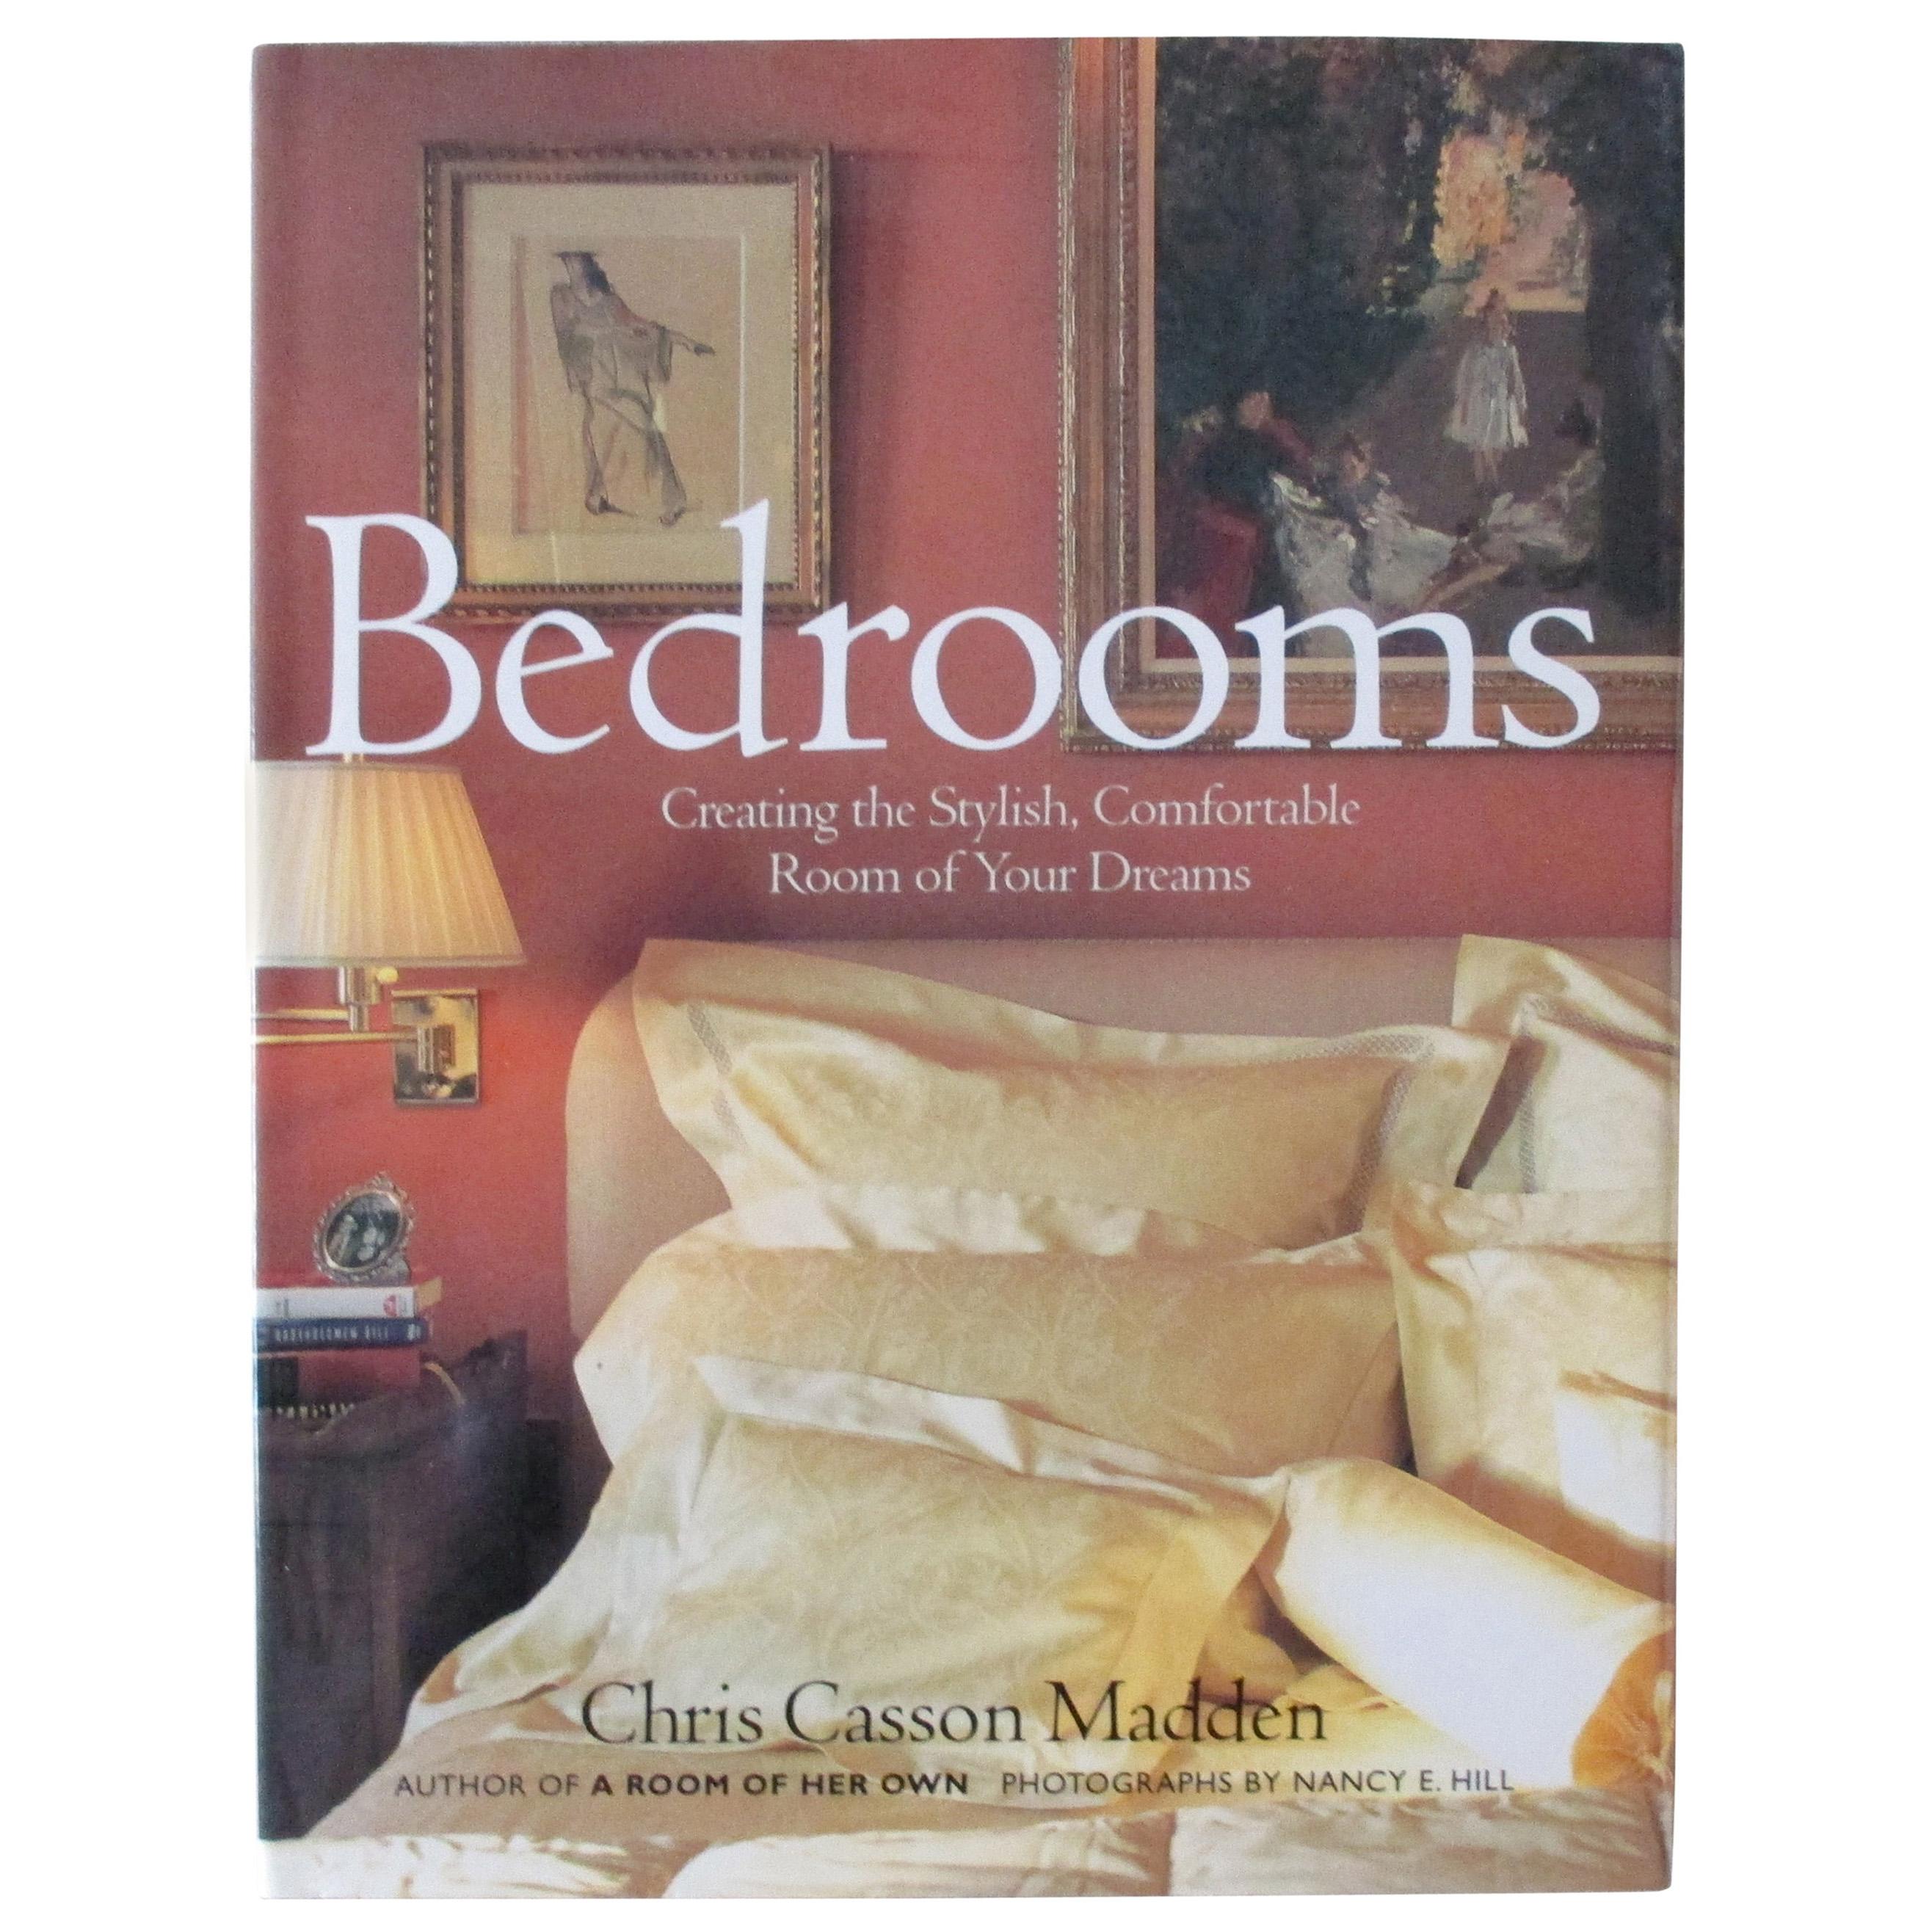 Bedrooms Hardcover Book by Chris Casson Madden